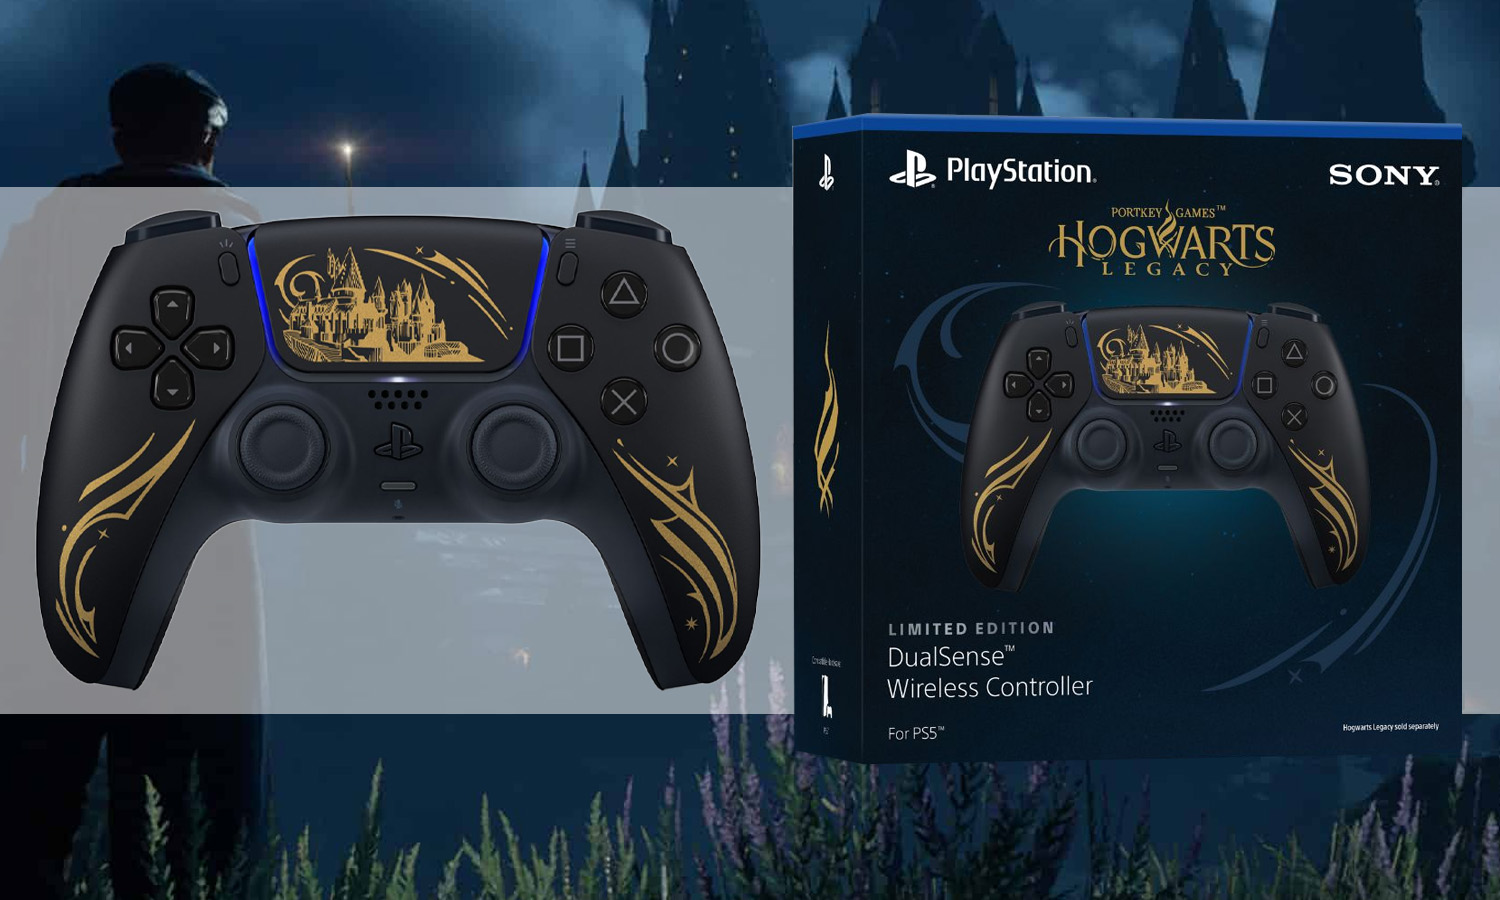 The Ultimate Gaming Experience with Harry Potter PS5 Controller